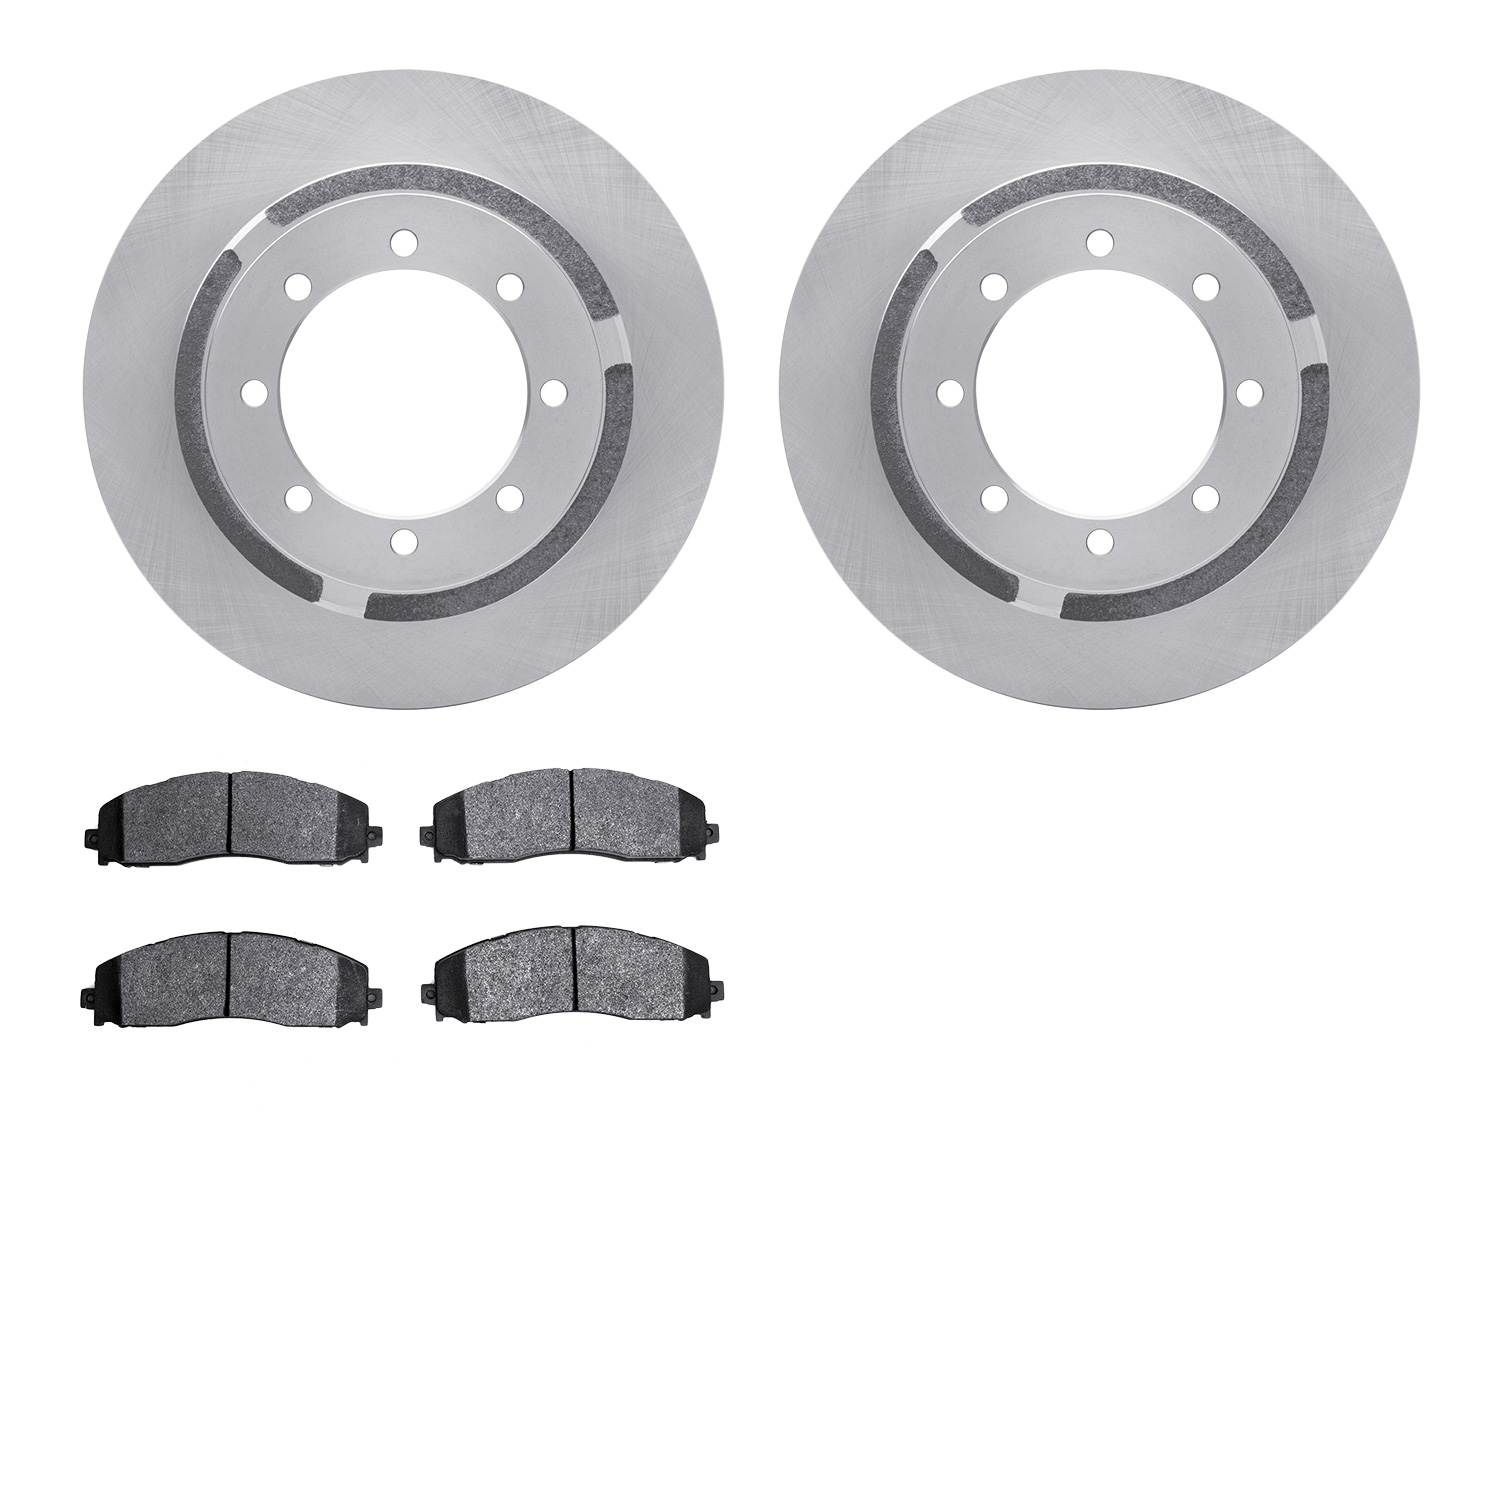 6402-54293 Brake Rotors with Ultimate-Duty Brake Pads, Fits Select Ford/Lincoln/Mercury/Mazda, Position: Rear